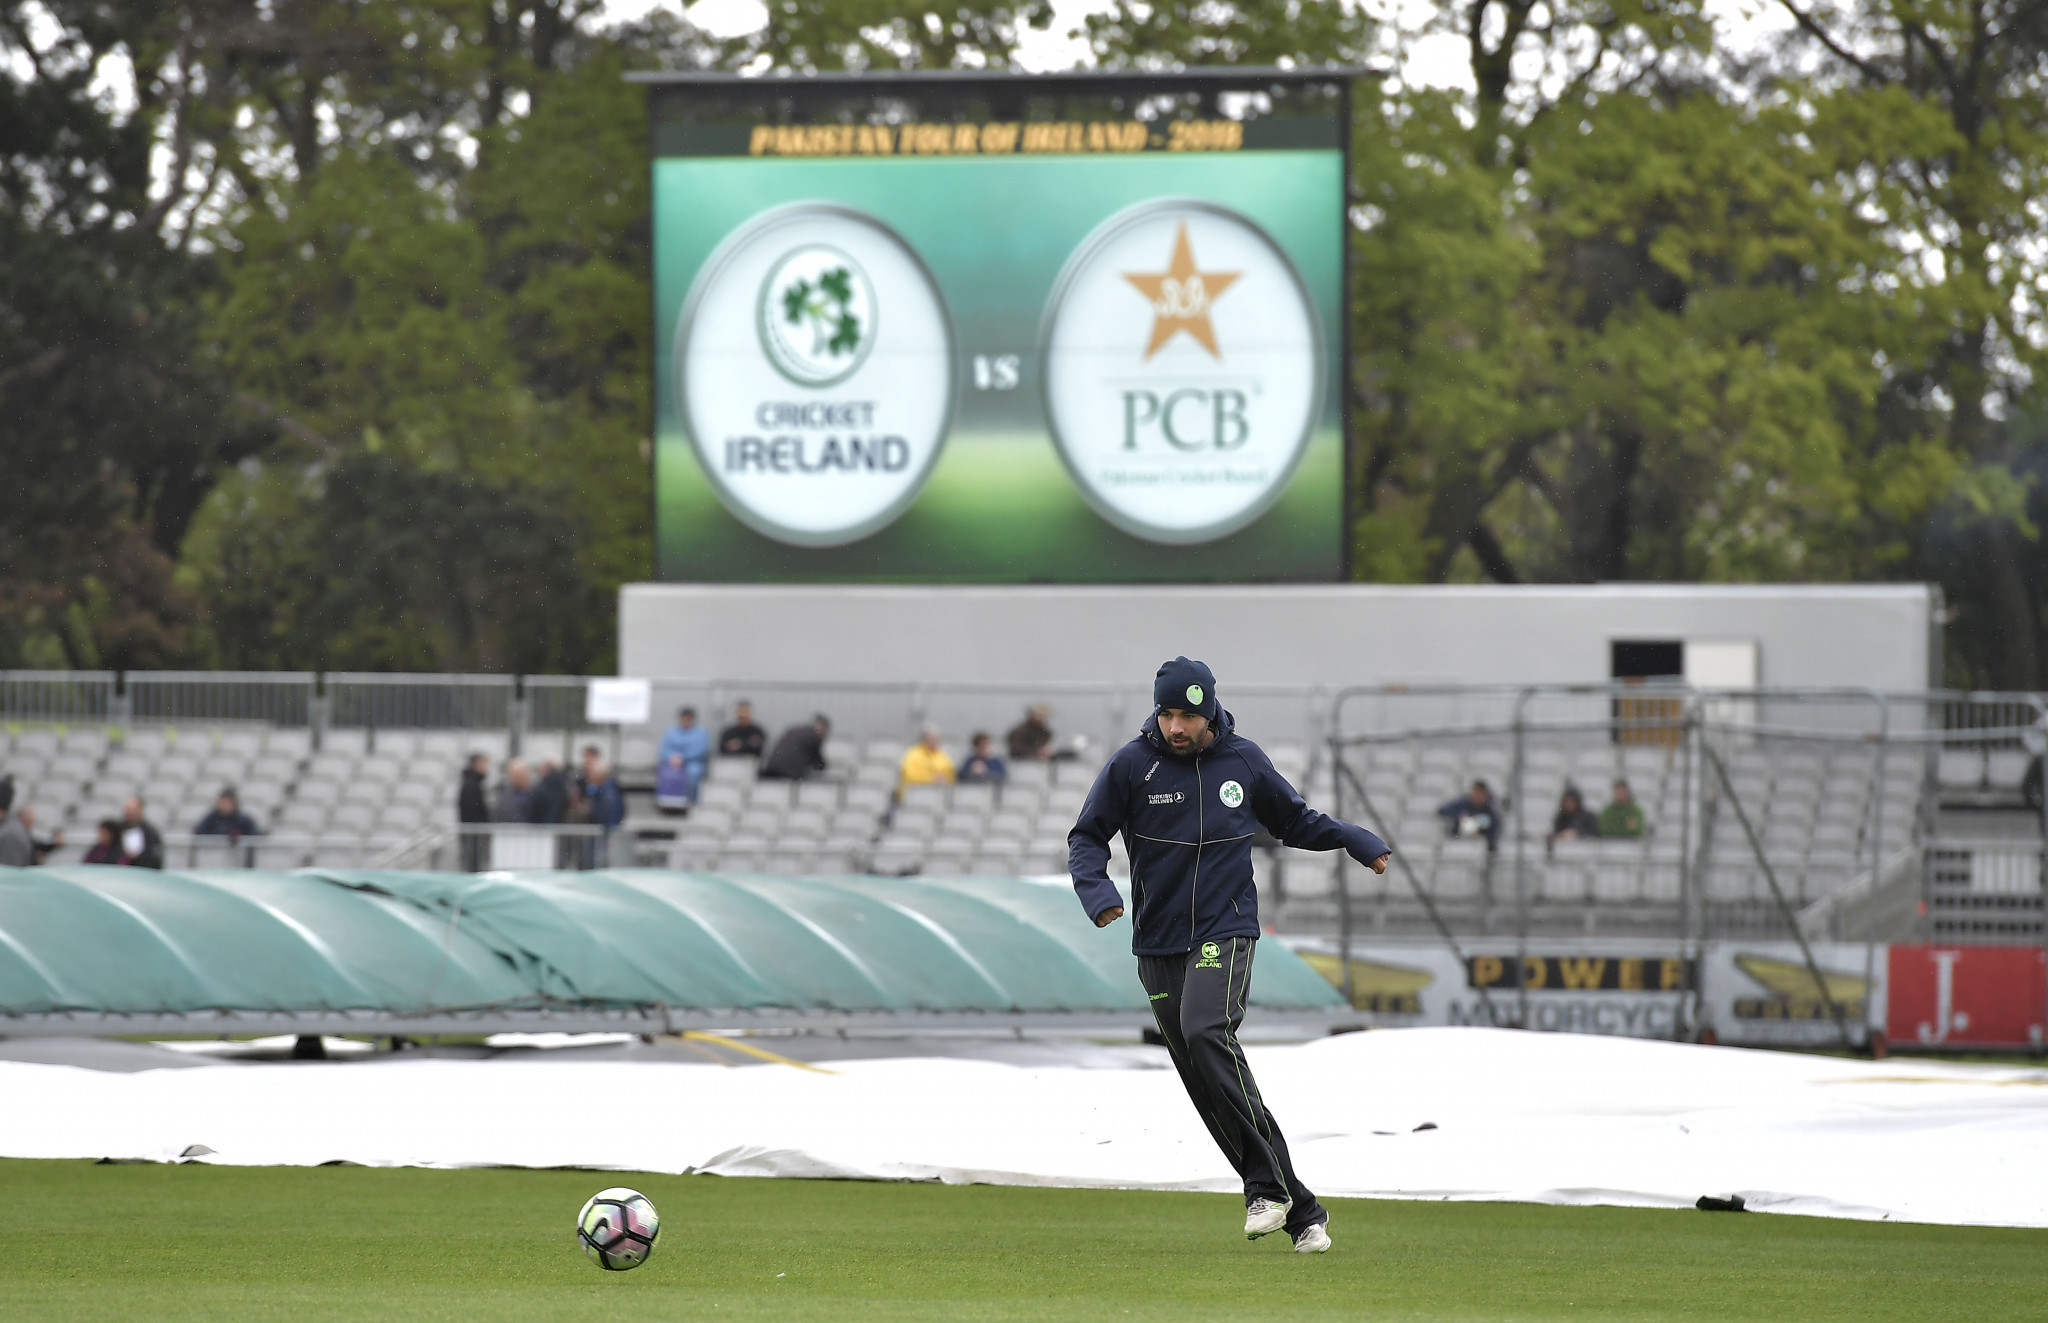 Ireland are still set to become only the 11th country to ever play Test cricket ©Getty Images